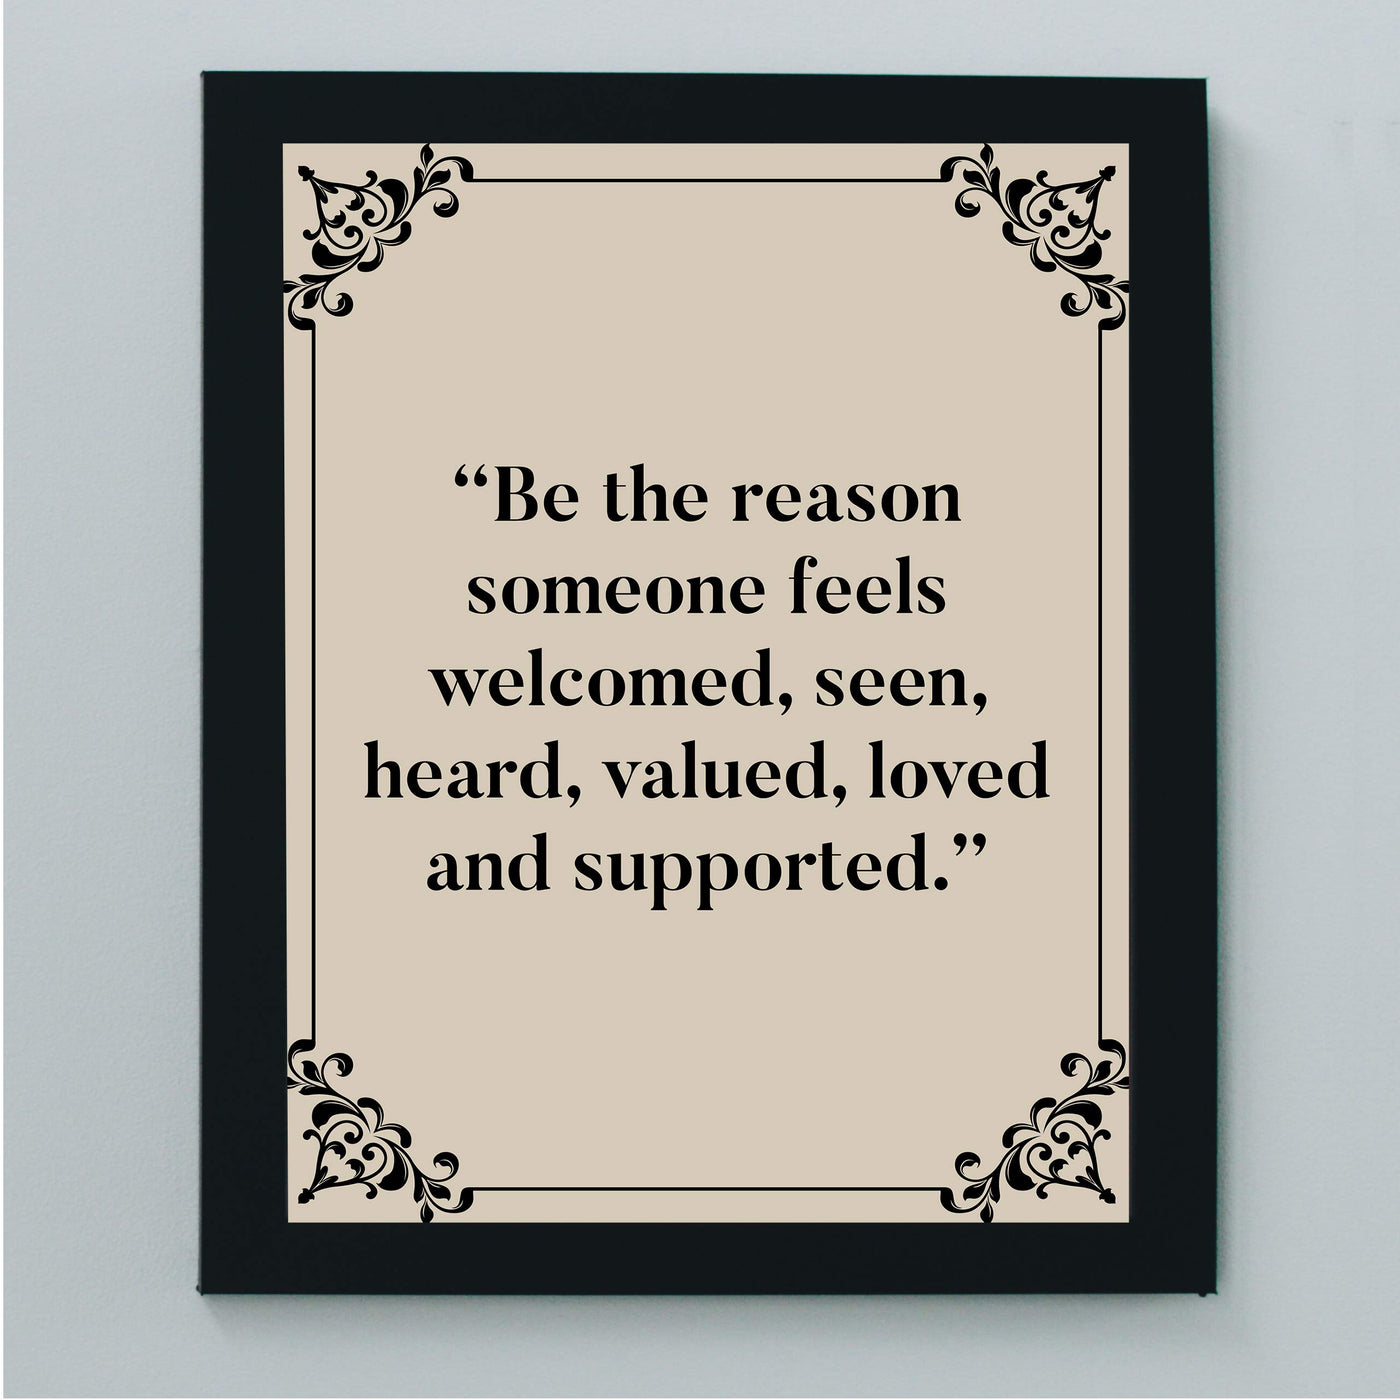 ?Be the Reason Someone Feels Loved & Supported?-Inspirational Wall Art -8 x 10" Typographic Poster Print-Ready to Frame. Motivational Home-Office-Classroom Decor. Perfect Sign for Teachers! Be Kind!